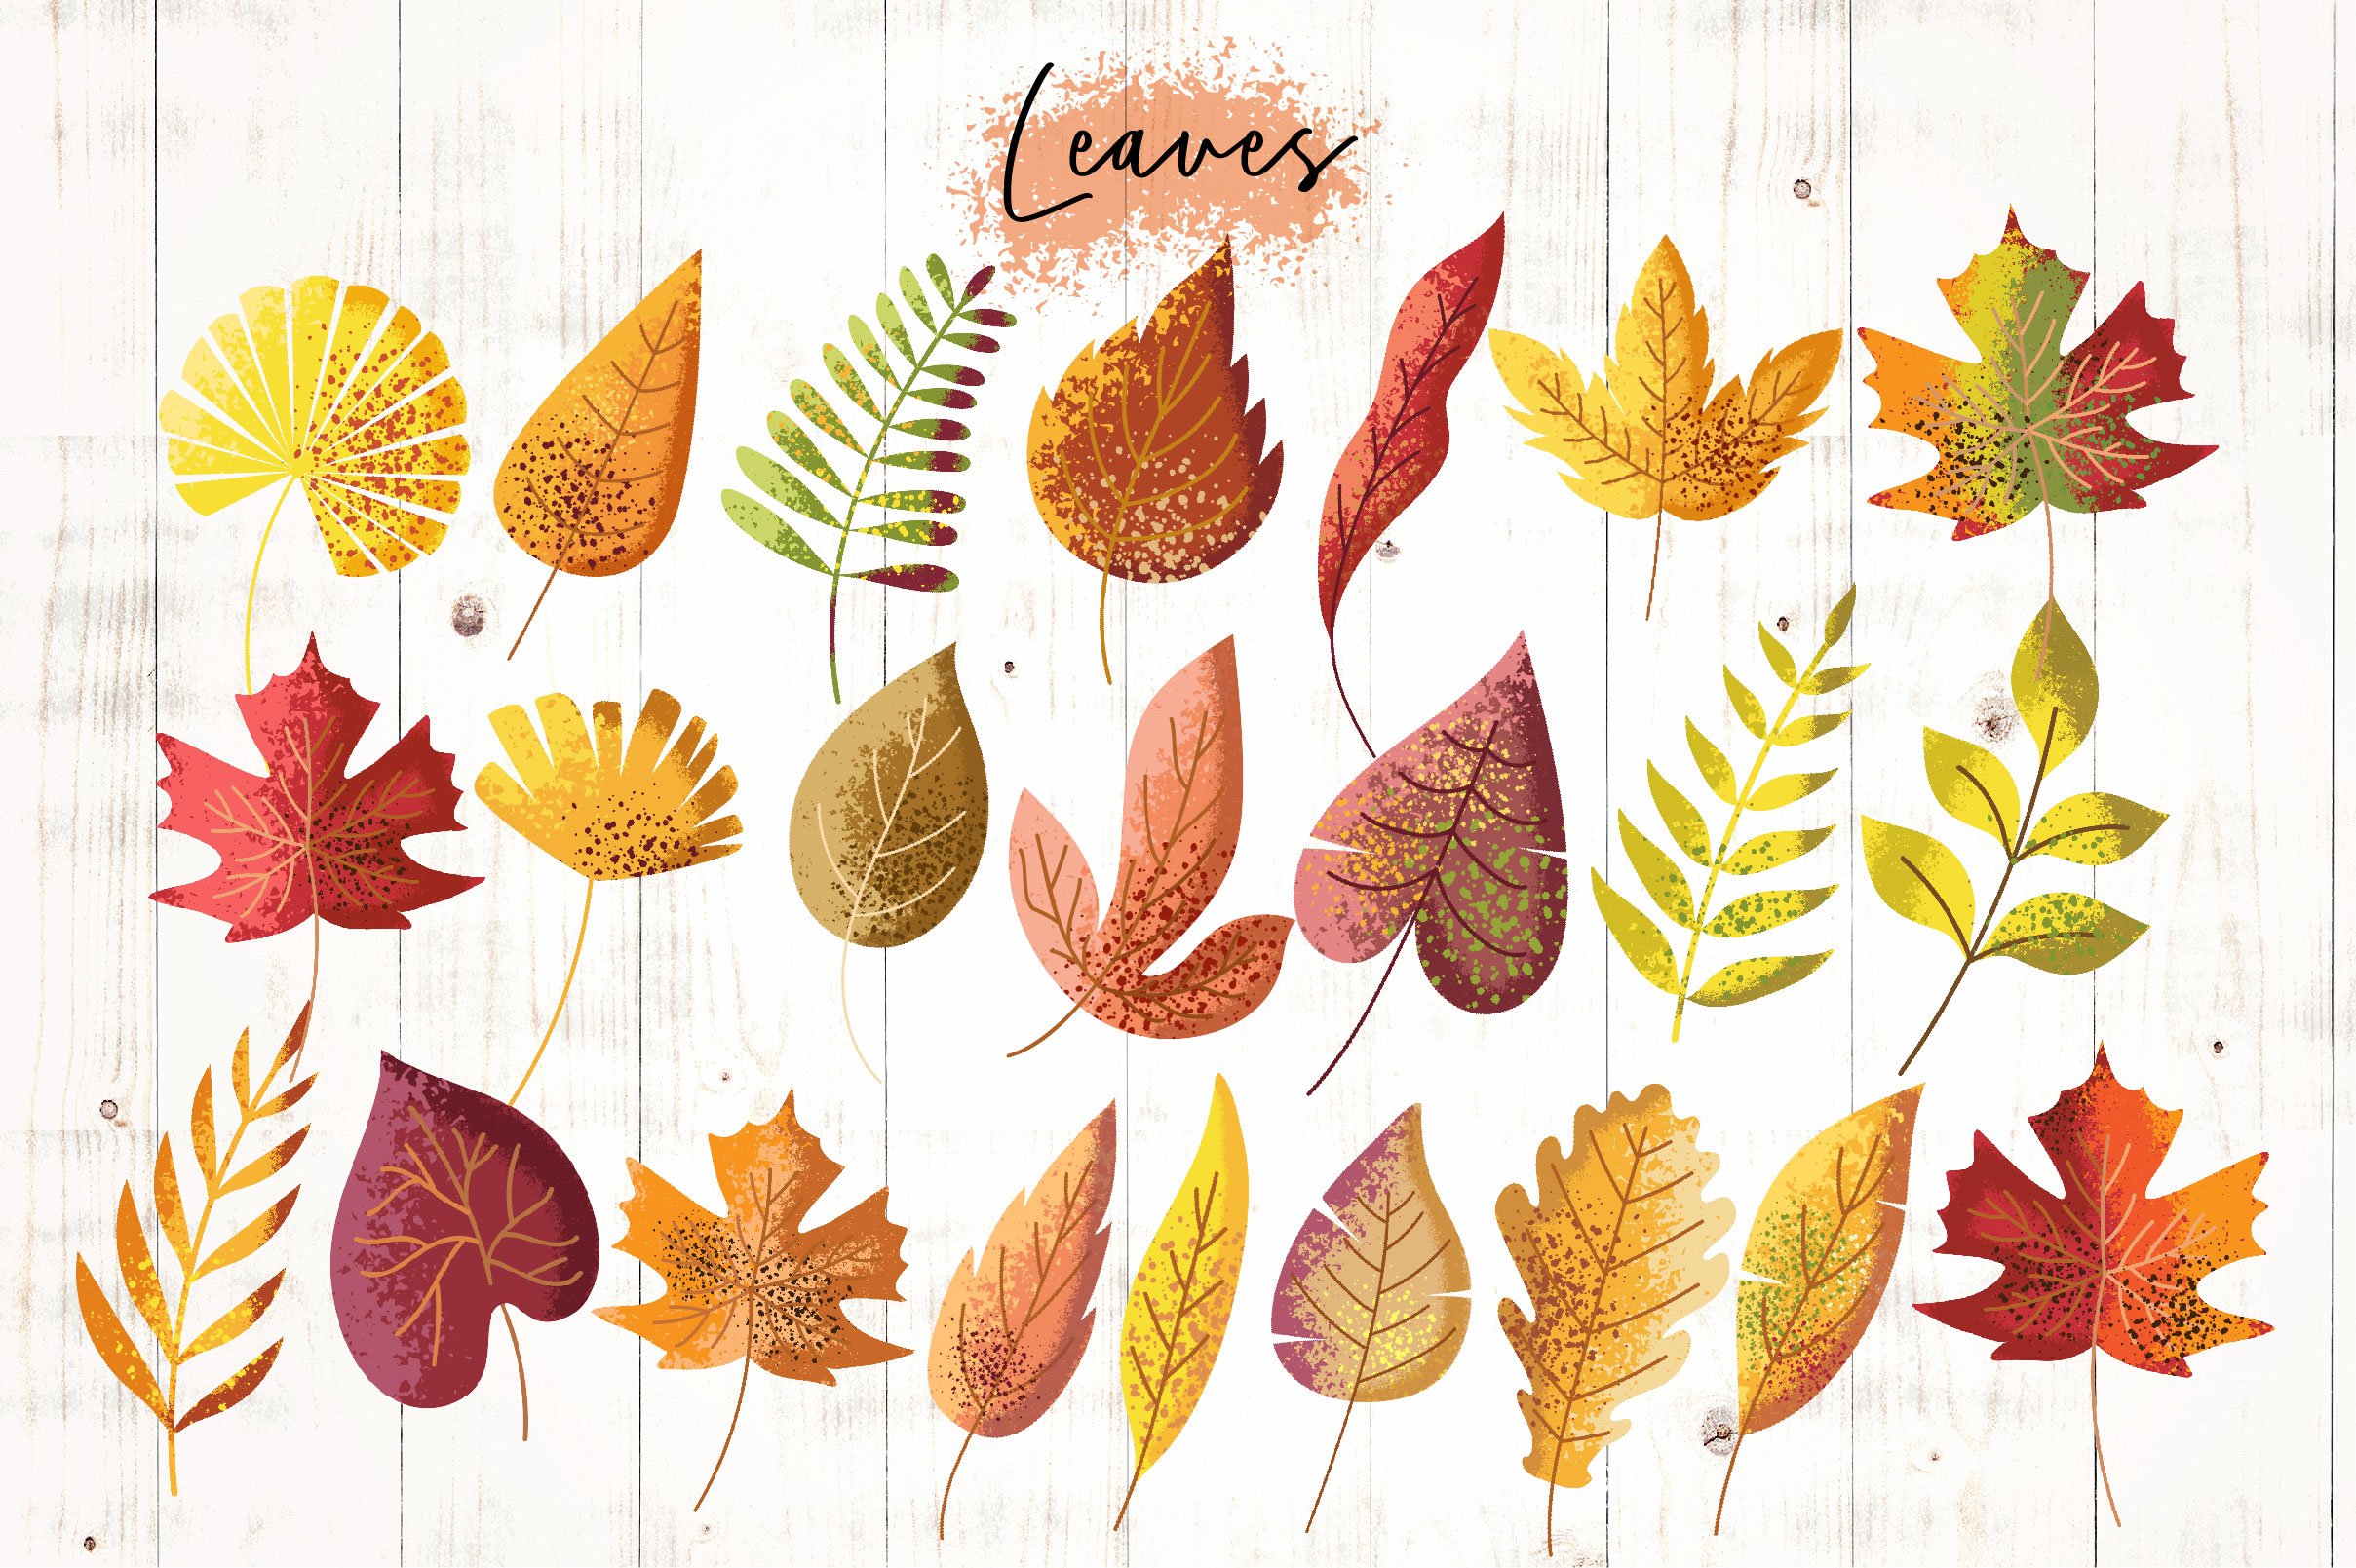 Autumn Vibes preview image.